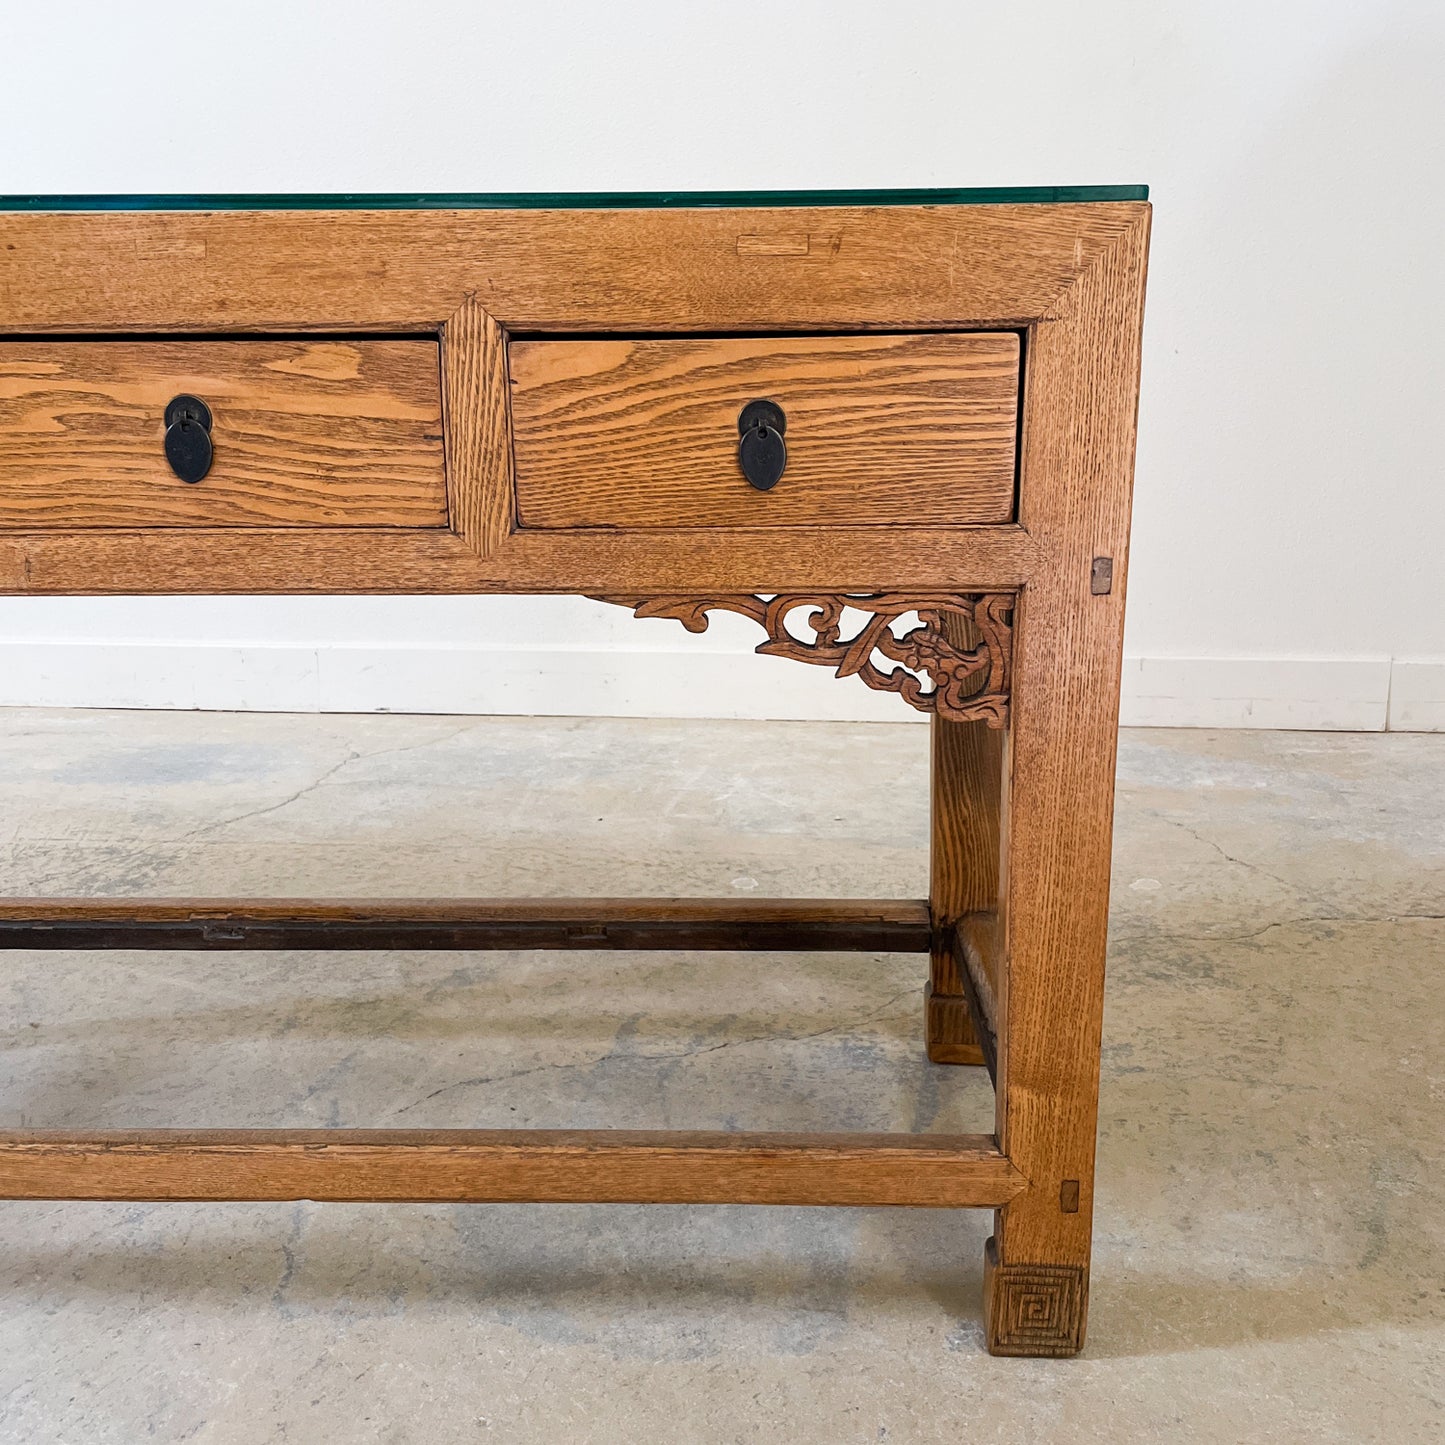 Asian Sofa Table with 3 drawers for storage and artistic scroll detail on legs